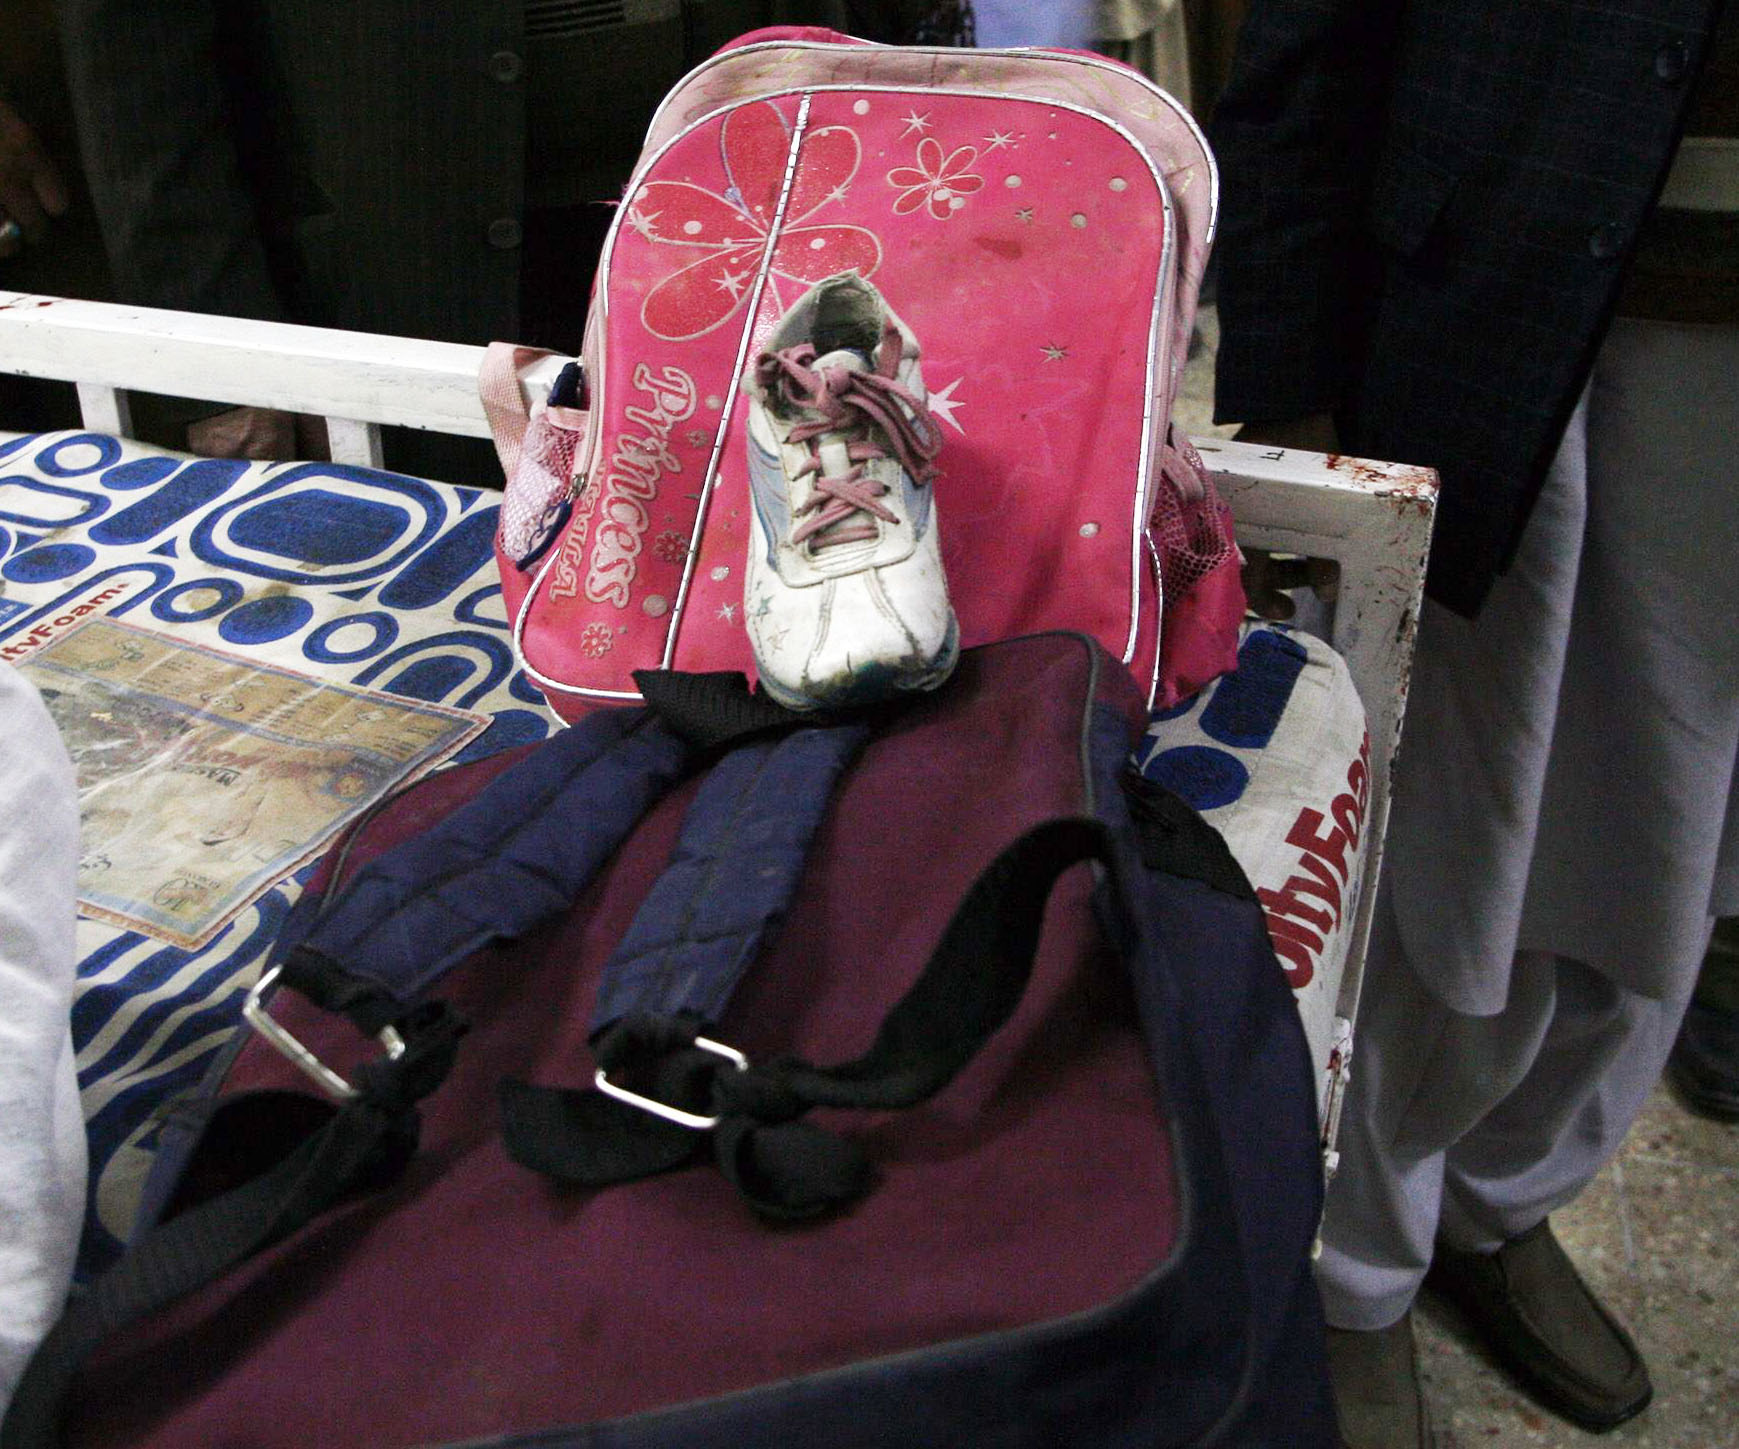 schoolbags and a shoe of children killed in the kirani road bomb blast are seen at a hospital in quetta photo reuters